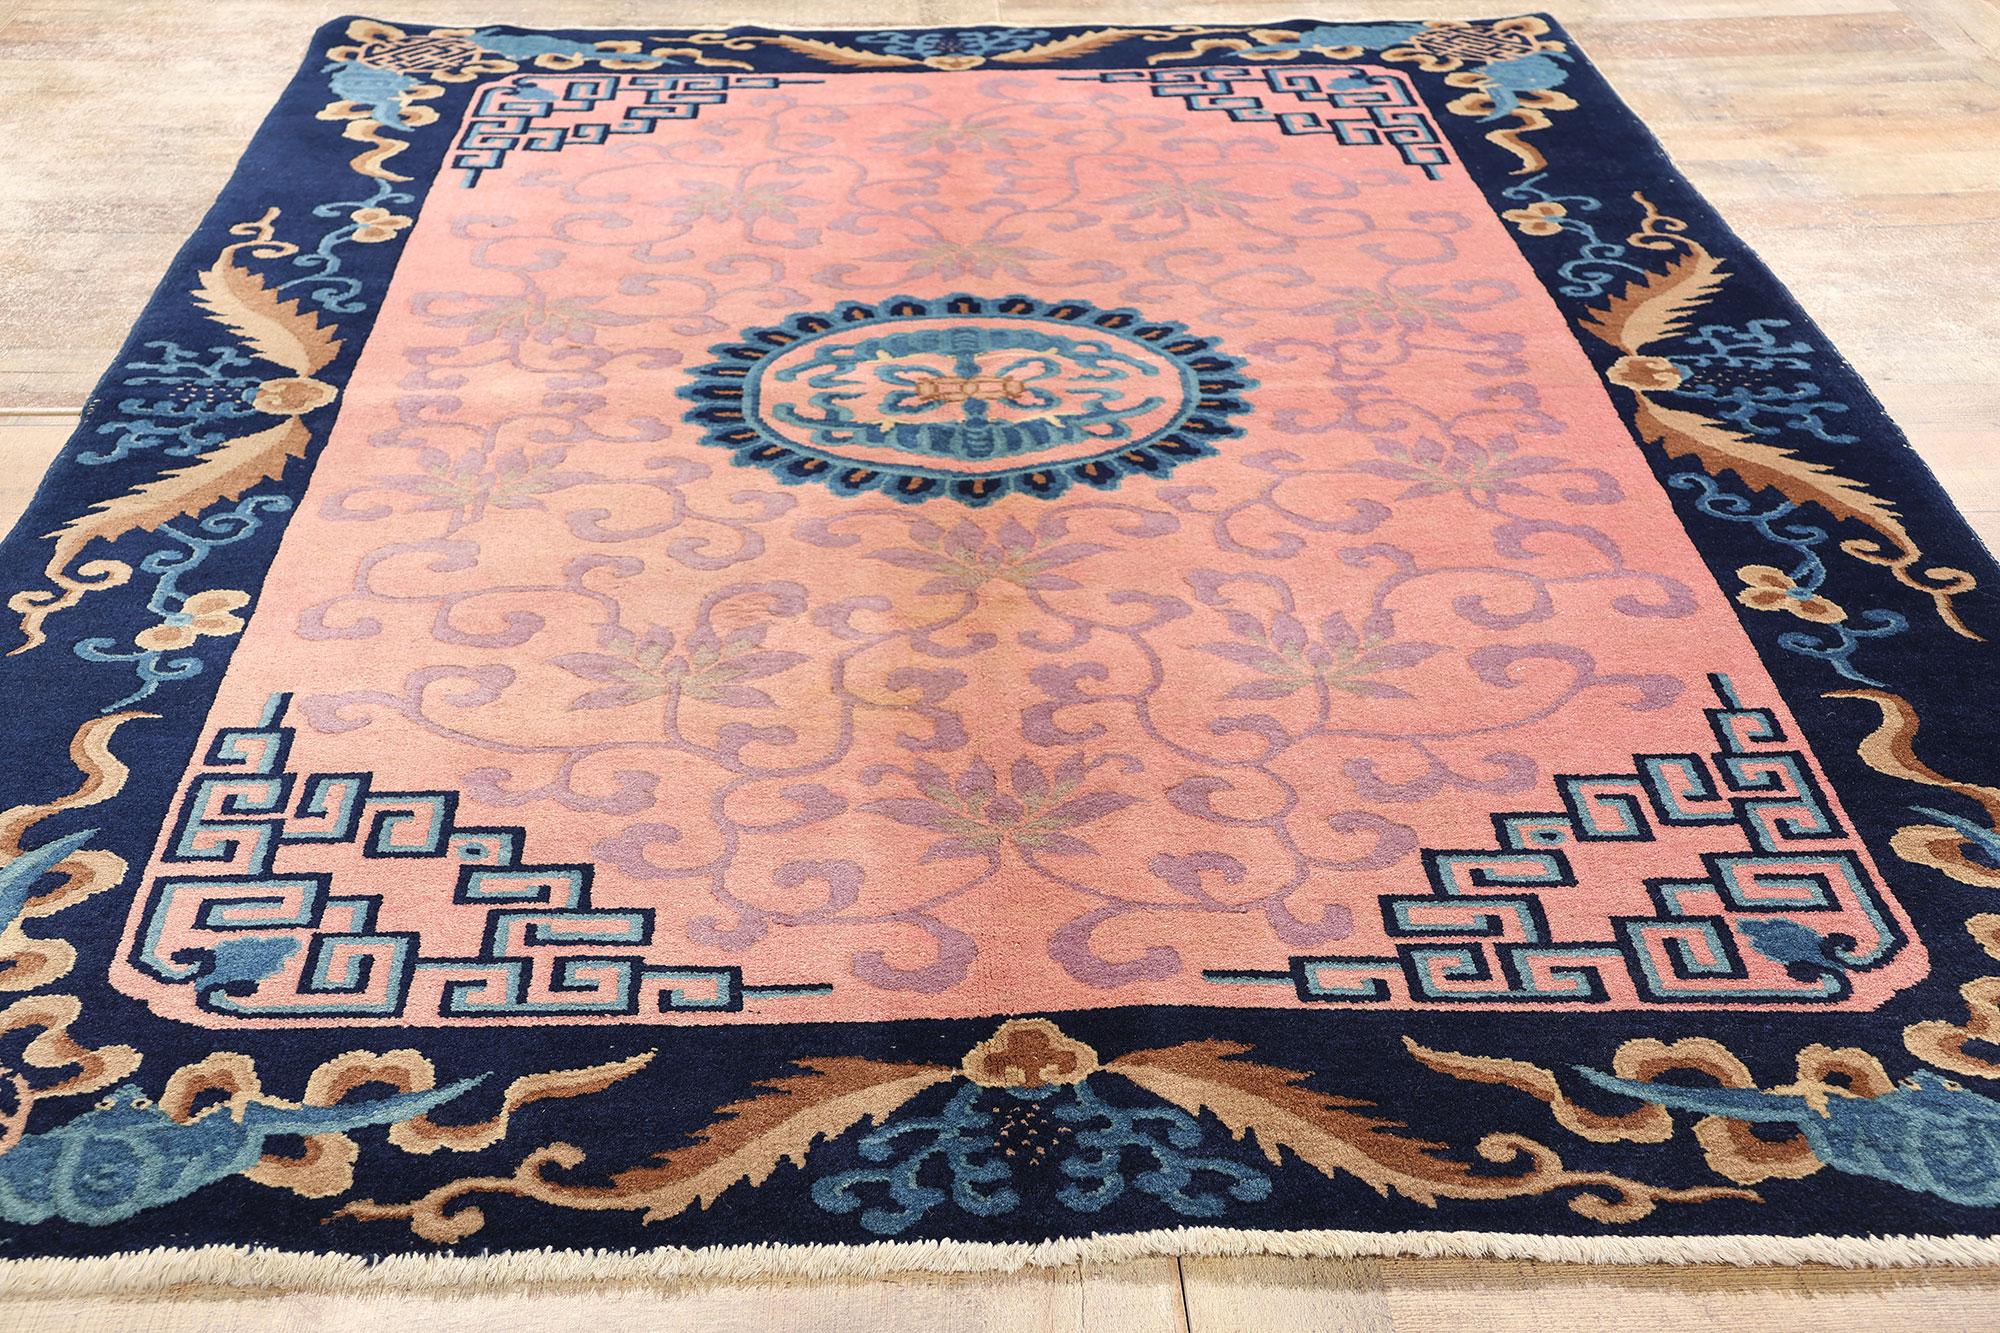 Antique Pink Chinese Art Deco Rug with Jazz Age Splendor For Sale 2